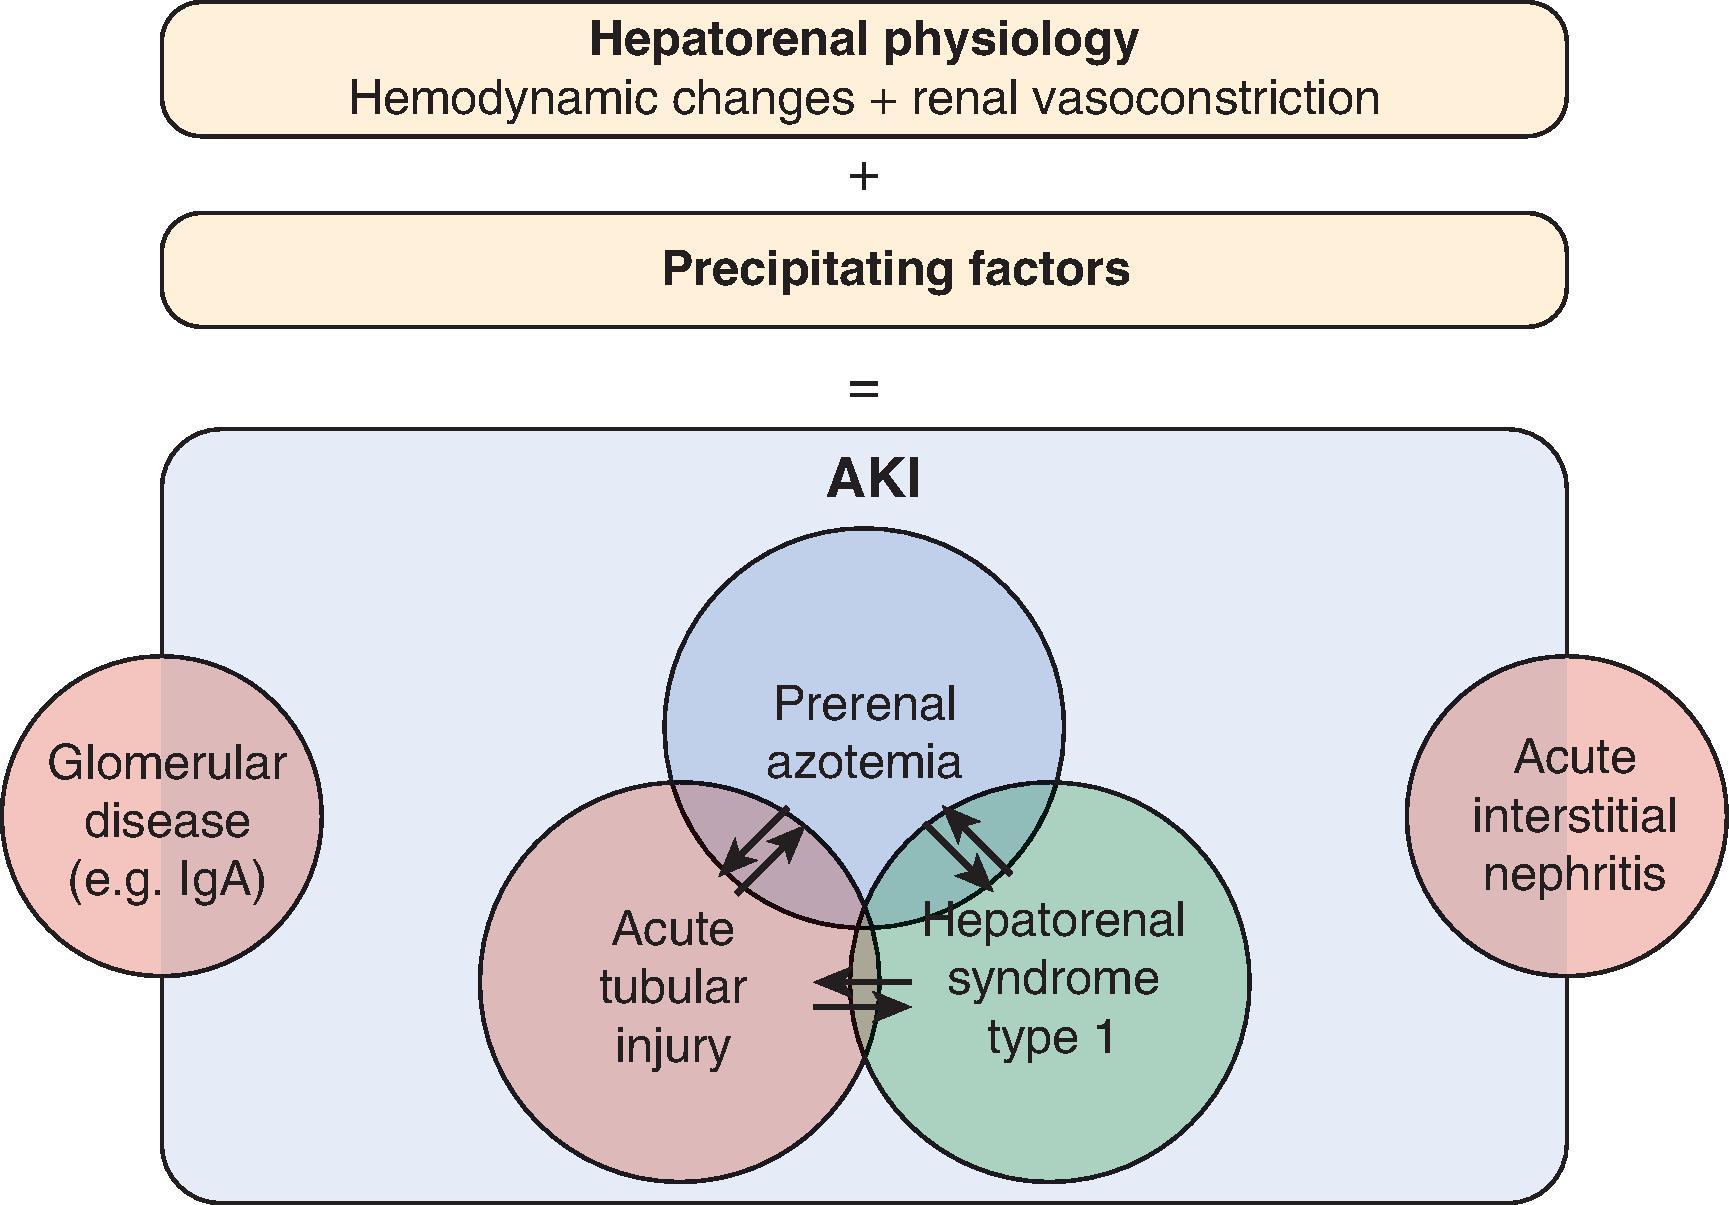 Fig. 30.2, Schematic representation of the distinct overlapping pathogenic mechanisms that may be present and contributing to acute kidney injury (AKI) in patients with cirrhosis.